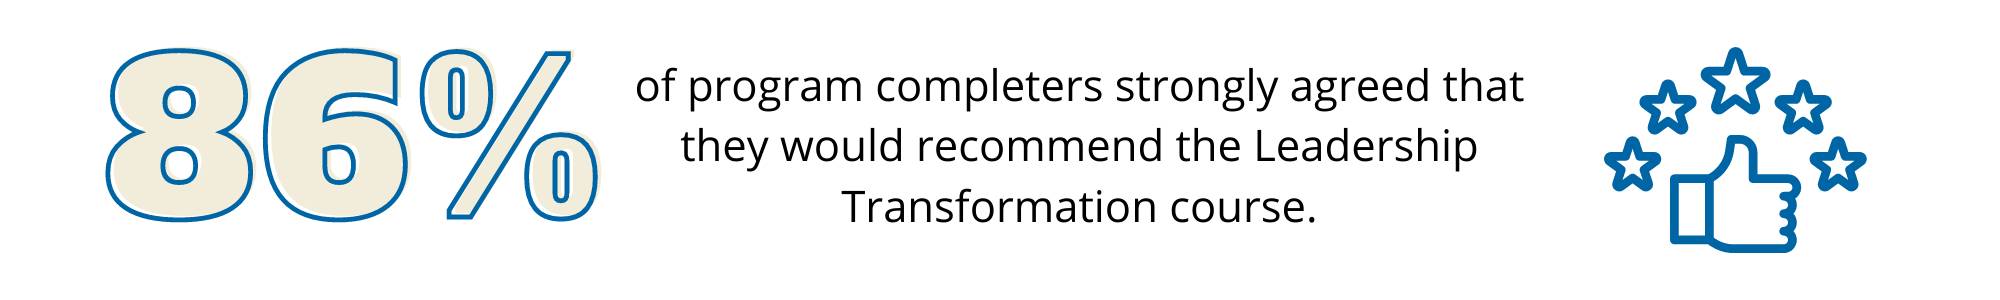 86% of program completers strongly agreed that they would recommend the Leadership Transformation course.